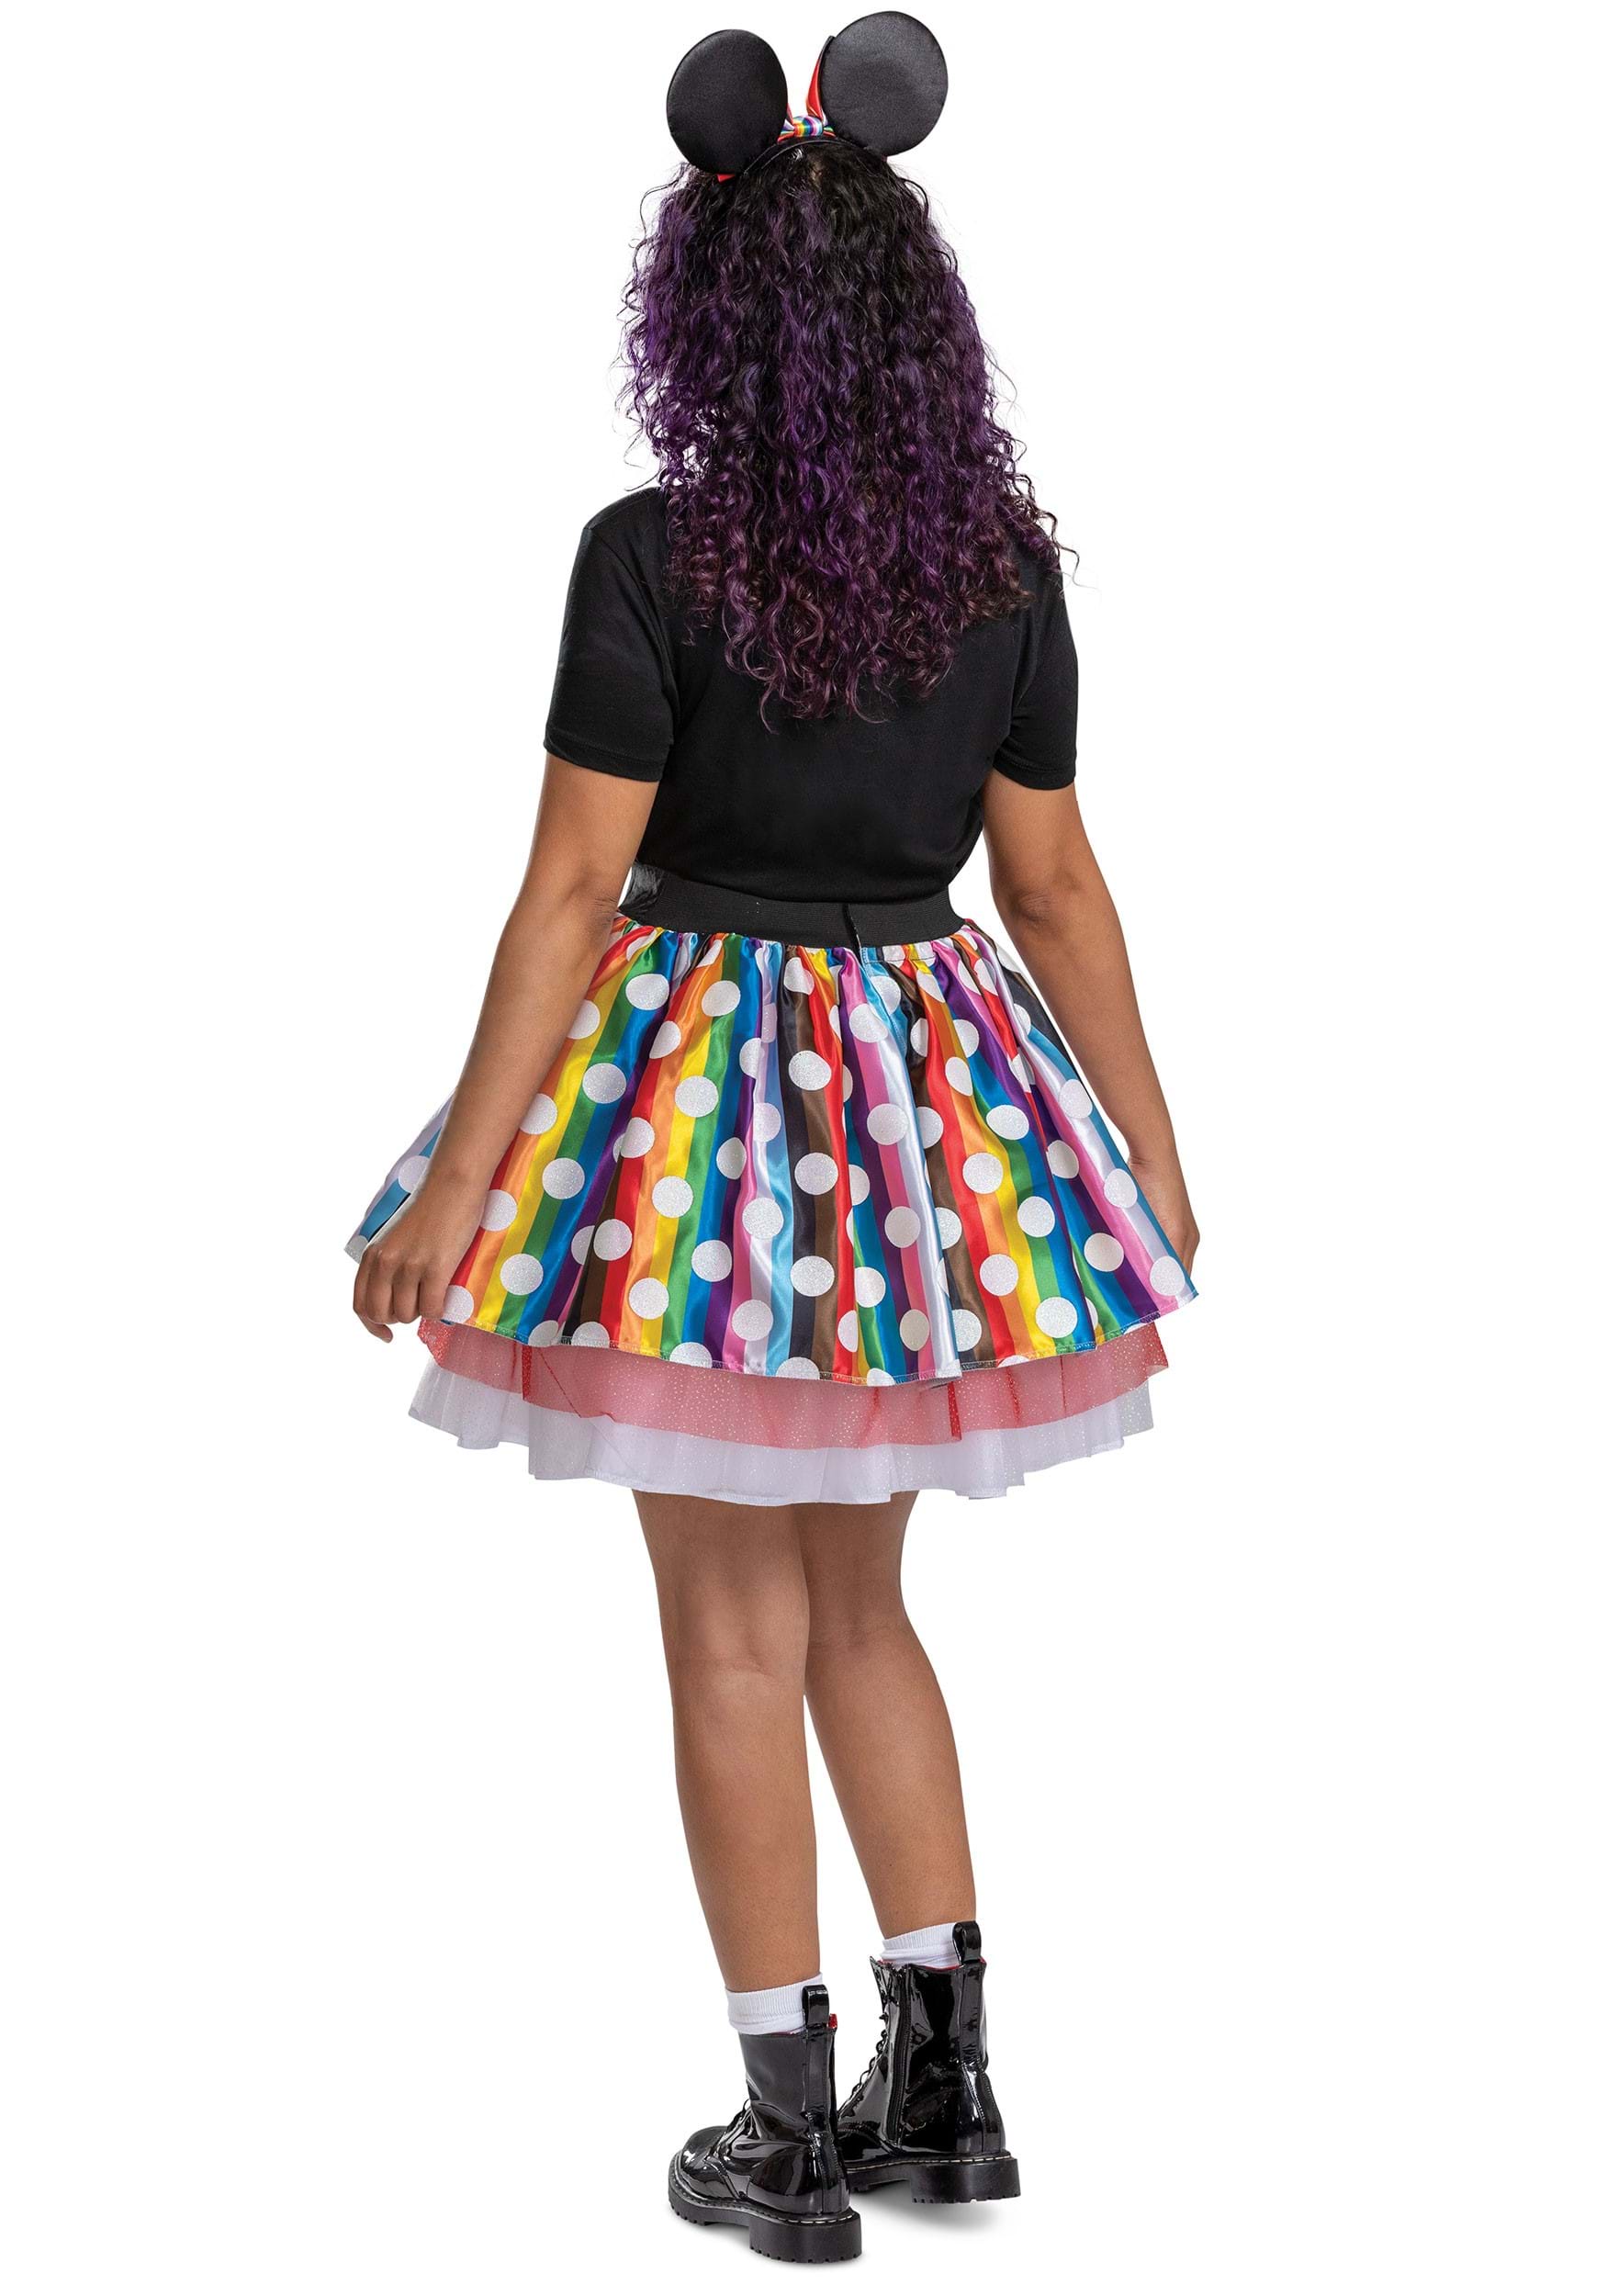 Disney Pride Minnie Mouse Costume Dress For Women